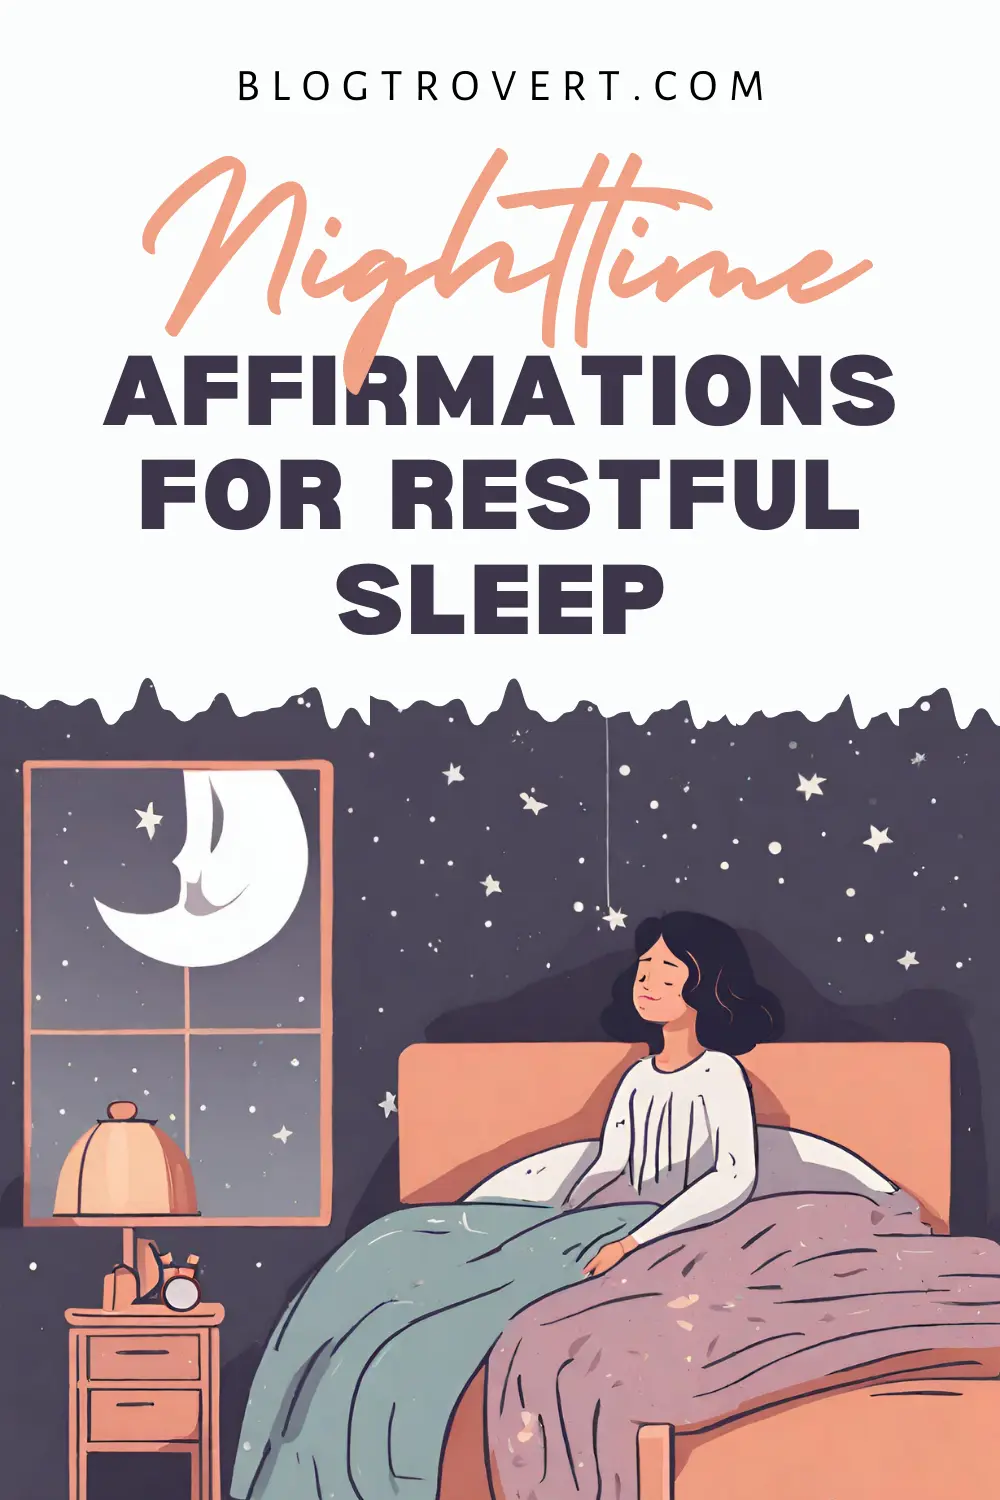 Nighttime affirmations for a restful sleep